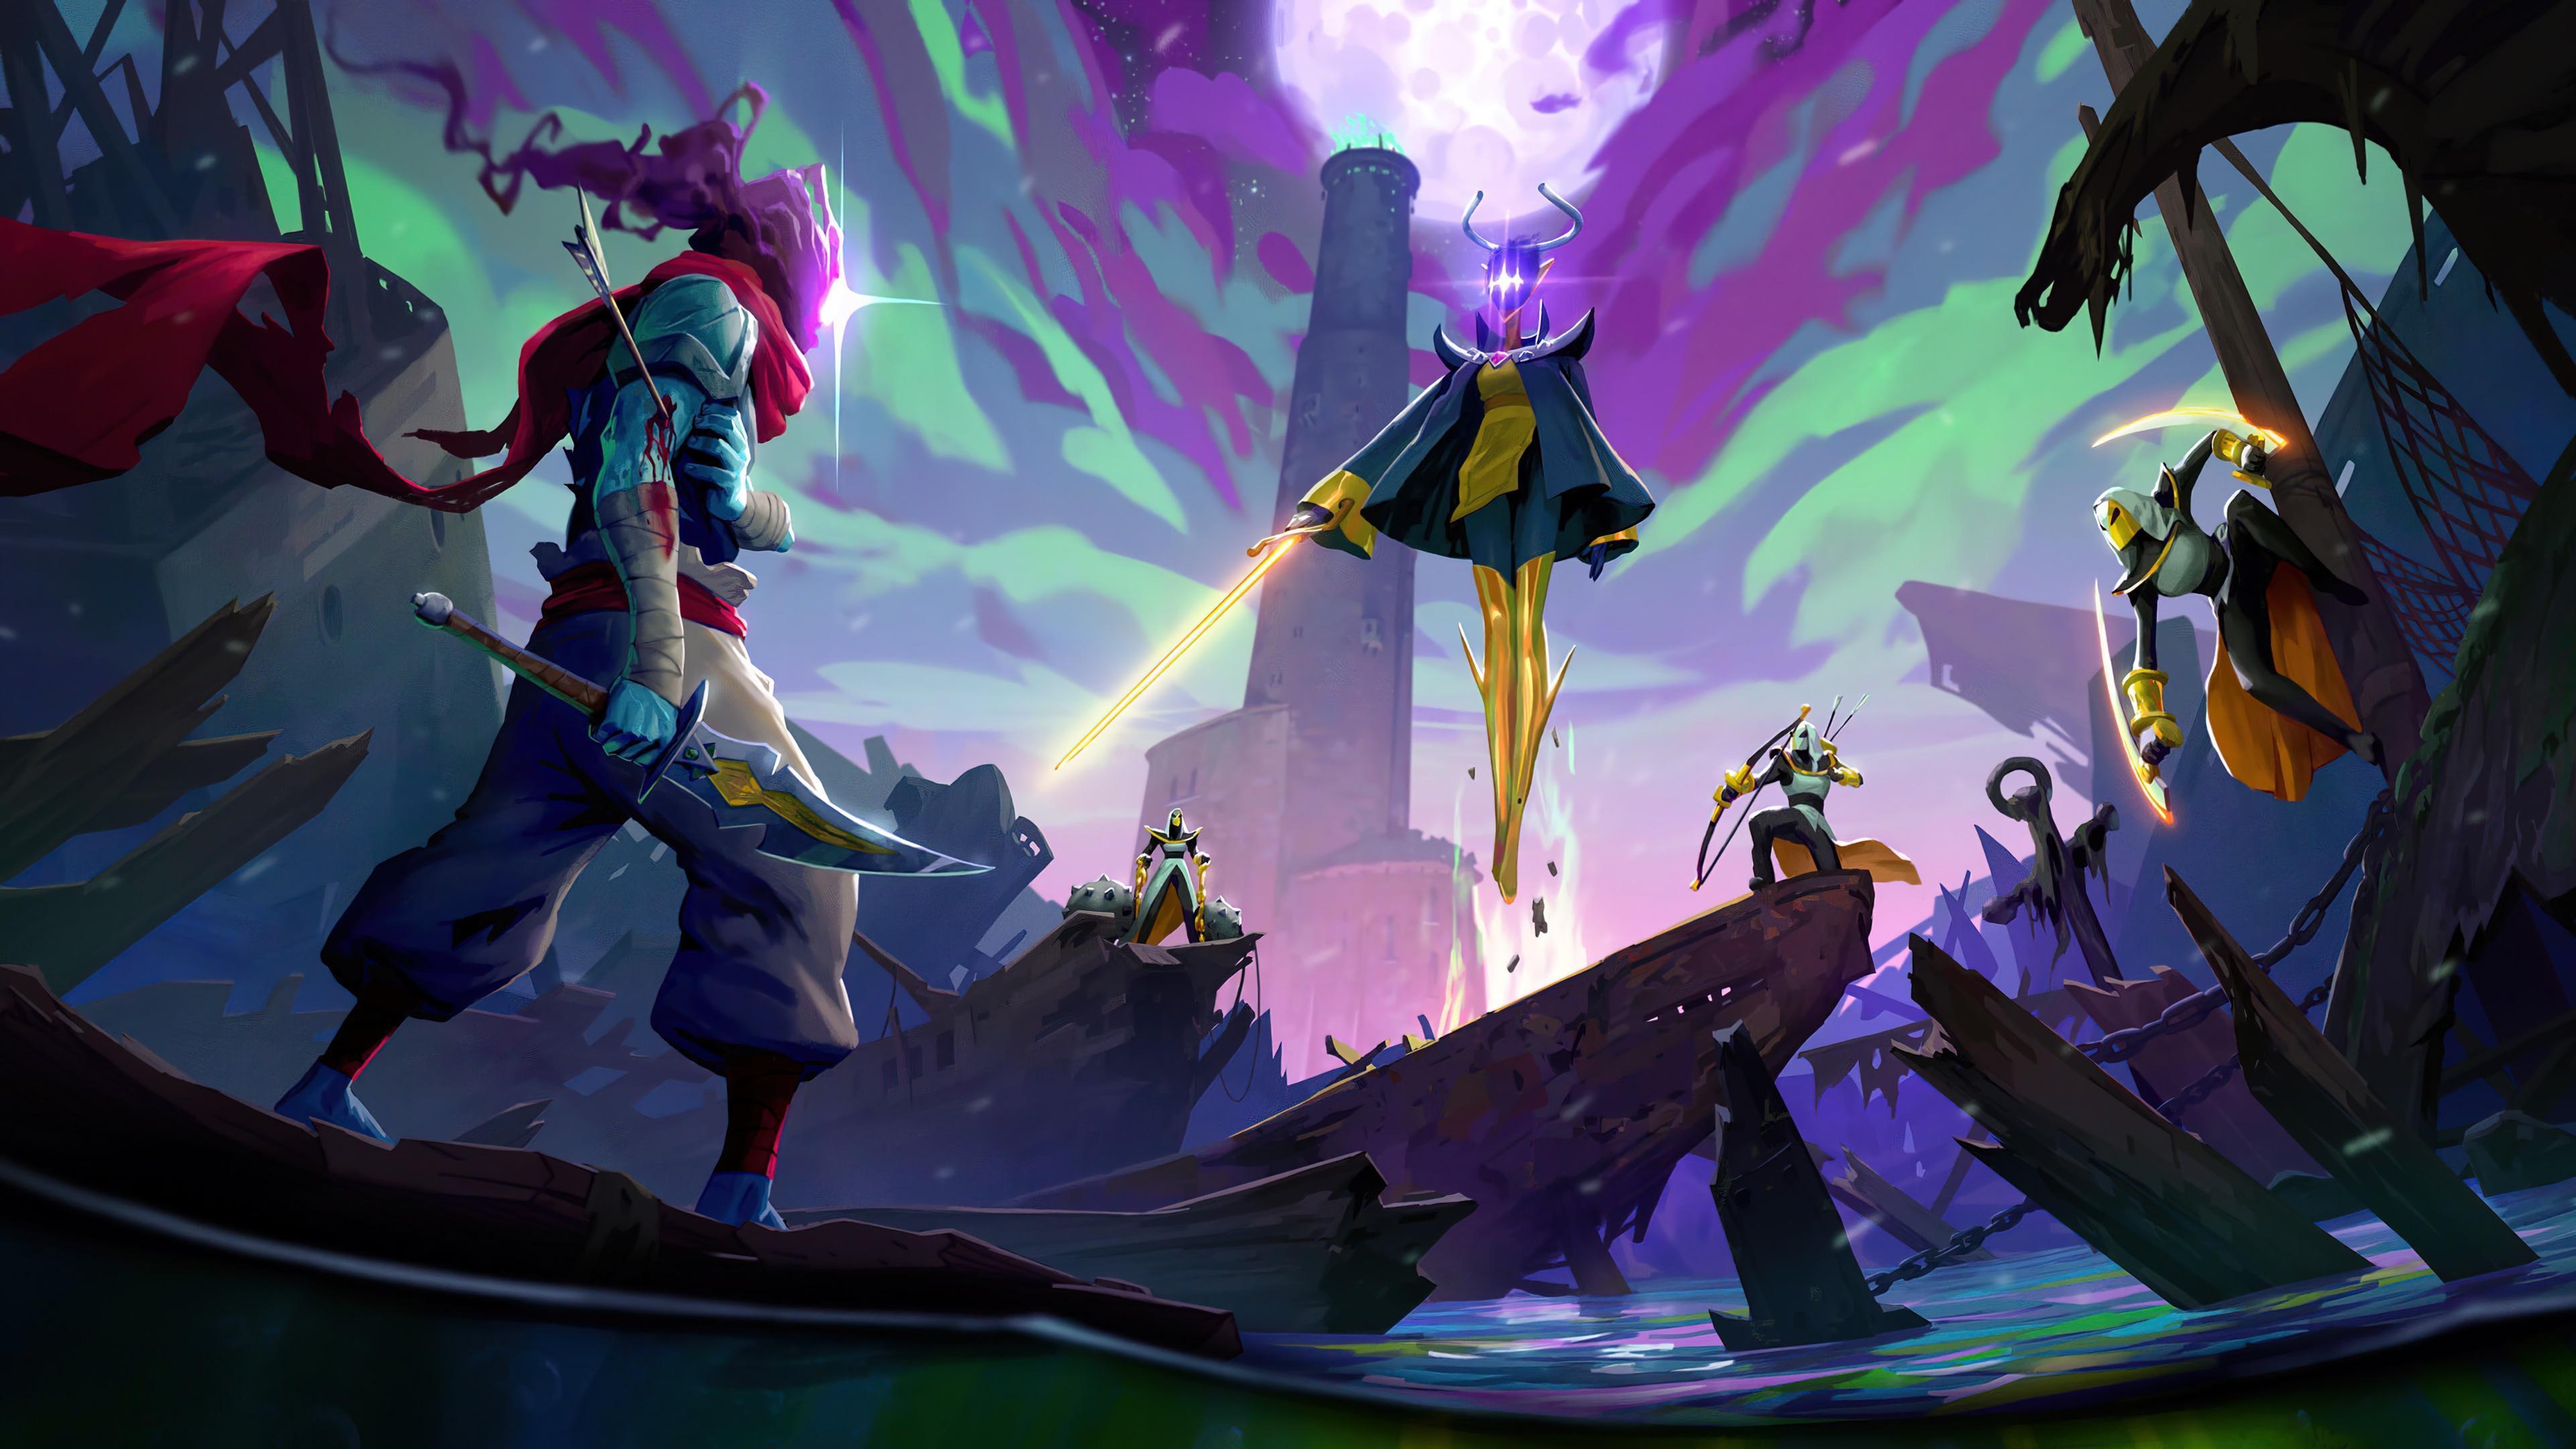 HD wallpaper, The, Sea, Queen, Dead Cells, 4K, And, The, Game